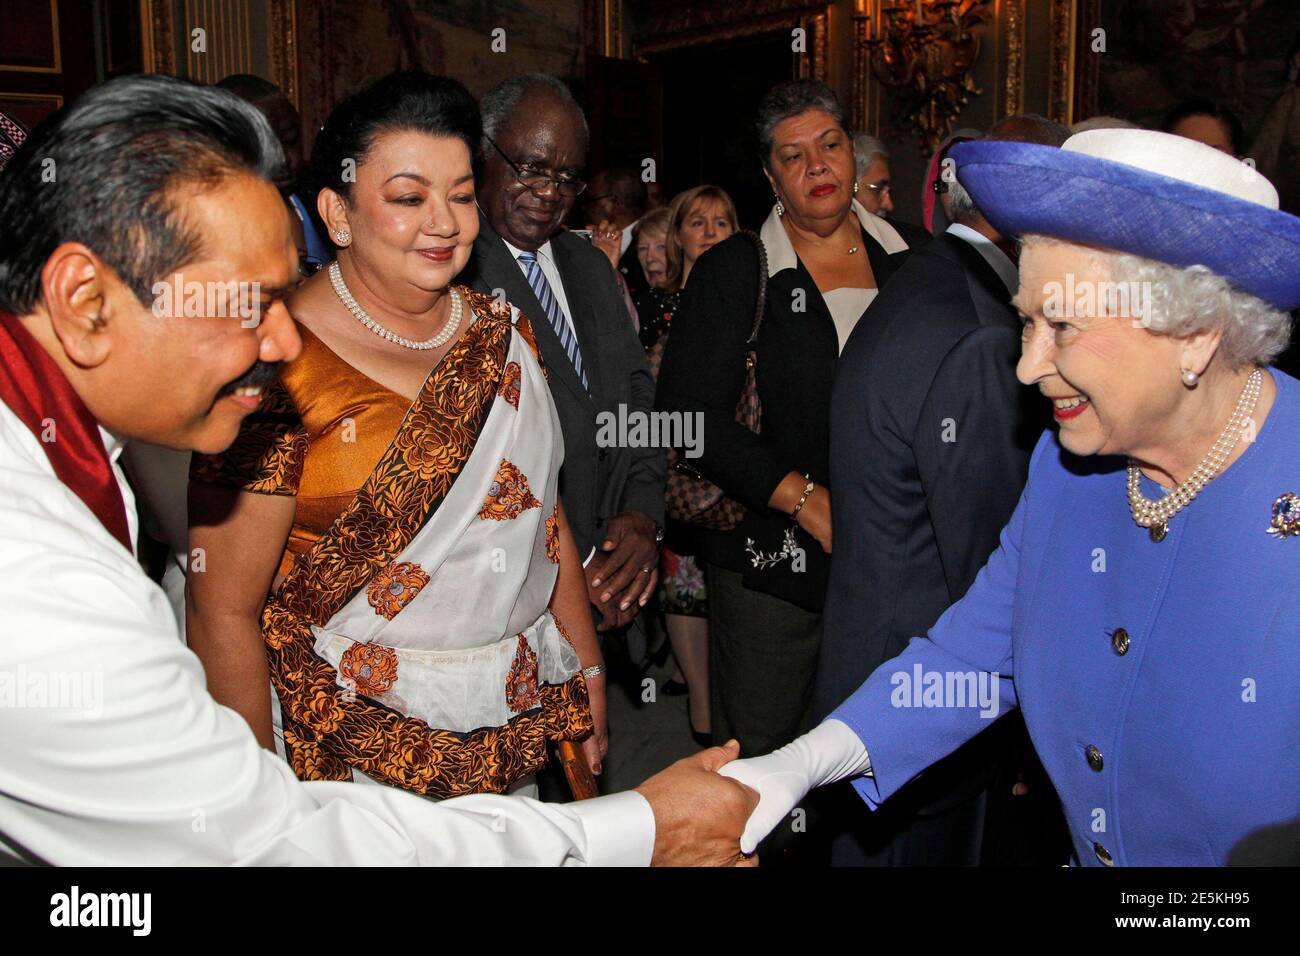 Britain's Queen Elizabeth (R) meets with Sri Lanka's President Mahinda Rajapaksa (L) and his wife Shiranthi Rajapaksa during a reception prior to a Diamond Jubilee lunch with Commonwealth Nations Heads of Government and representatives in central London June 6, 2012. REUTERS/Lefteris Pitarakis/POOL  (BRITAIN - Tags: ENTERTAINMENT ROYALS POLITICS) Stock Photo